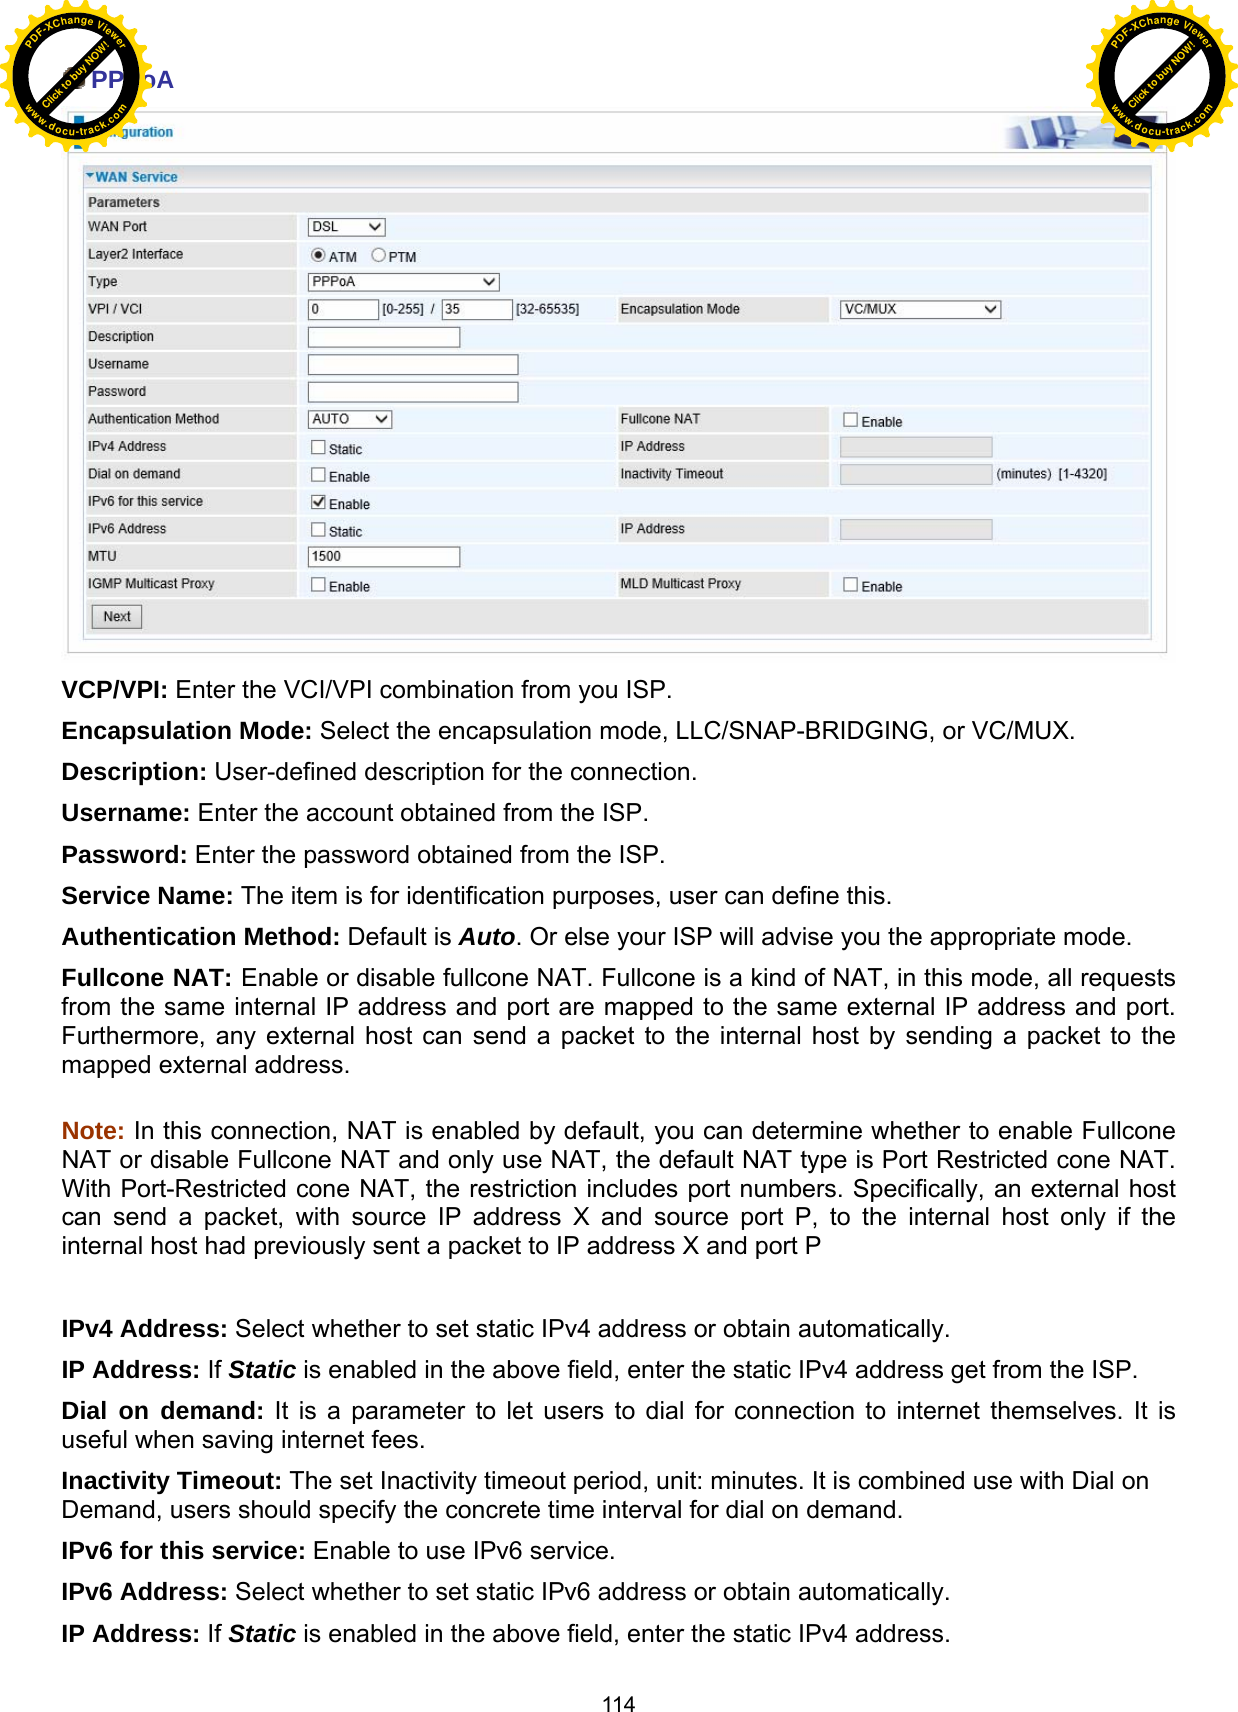  114  PPPoA  VCP/VPI: Enter the VCI/VPI combination from you ISP.  Encapsulation Mode: Select the encapsulation mode, LLC/SNAP-BRIDGING, or VC/MUX. Description: User-defined description for the connection. Username: Enter the account obtained from the ISP.  Password: Enter the password obtained from the ISP. Service Name: The item is for identification purposes, user can define this. Authentication Method: Default is Auto. Or else your ISP will advise you the appropriate mode. Fullcone NAT: Enable or disable fullcone NAT. Fullcone is a kind of NAT, in this mode, all requests from the same internal IP address and port are mapped to the same external IP address and port. Furthermore, any external host can send a packet to the internal host by sending a packet to the mapped external address.  Note: In this connection, NAT is enabled by default, you can determine whether to enable Fullcone NAT or disable Fullcone NAT and only use NAT, the default NAT type is Port Restricted cone NAT. With Port-Restricted cone NAT, the restriction includes port numbers. Specifically, an external host can send a packet, with source IP address X and source port P, to the internal host only if the internal host had previously sent a packet to IP address X and port P  IPv4 Address: Select whether to set static IPv4 address or obtain automatically. IP Address: If Static is enabled in the above field, enter the static IPv4 address get from the ISP. Dial on demand: It is a parameter to let users to dial for connection to internet themselves. It is useful when saving internet fees. Inactivity Timeout: The set Inactivity timeout period, unit: minutes. It is combined use with Dial on Demand, users should specify the concrete time interval for dial on demand. IPv6 for this service: Enable to use IPv6 service. IPv6 Address: Select whether to set static IPv6 address or obtain automatically. IP Address: If Static is enabled in the above field, enter the static IPv4 address. Click to buy NOW!PDF-XChange Viewerwww.docu-track.comClick to buy NOW!PDF-XChange Viewerwww.docu-track.com